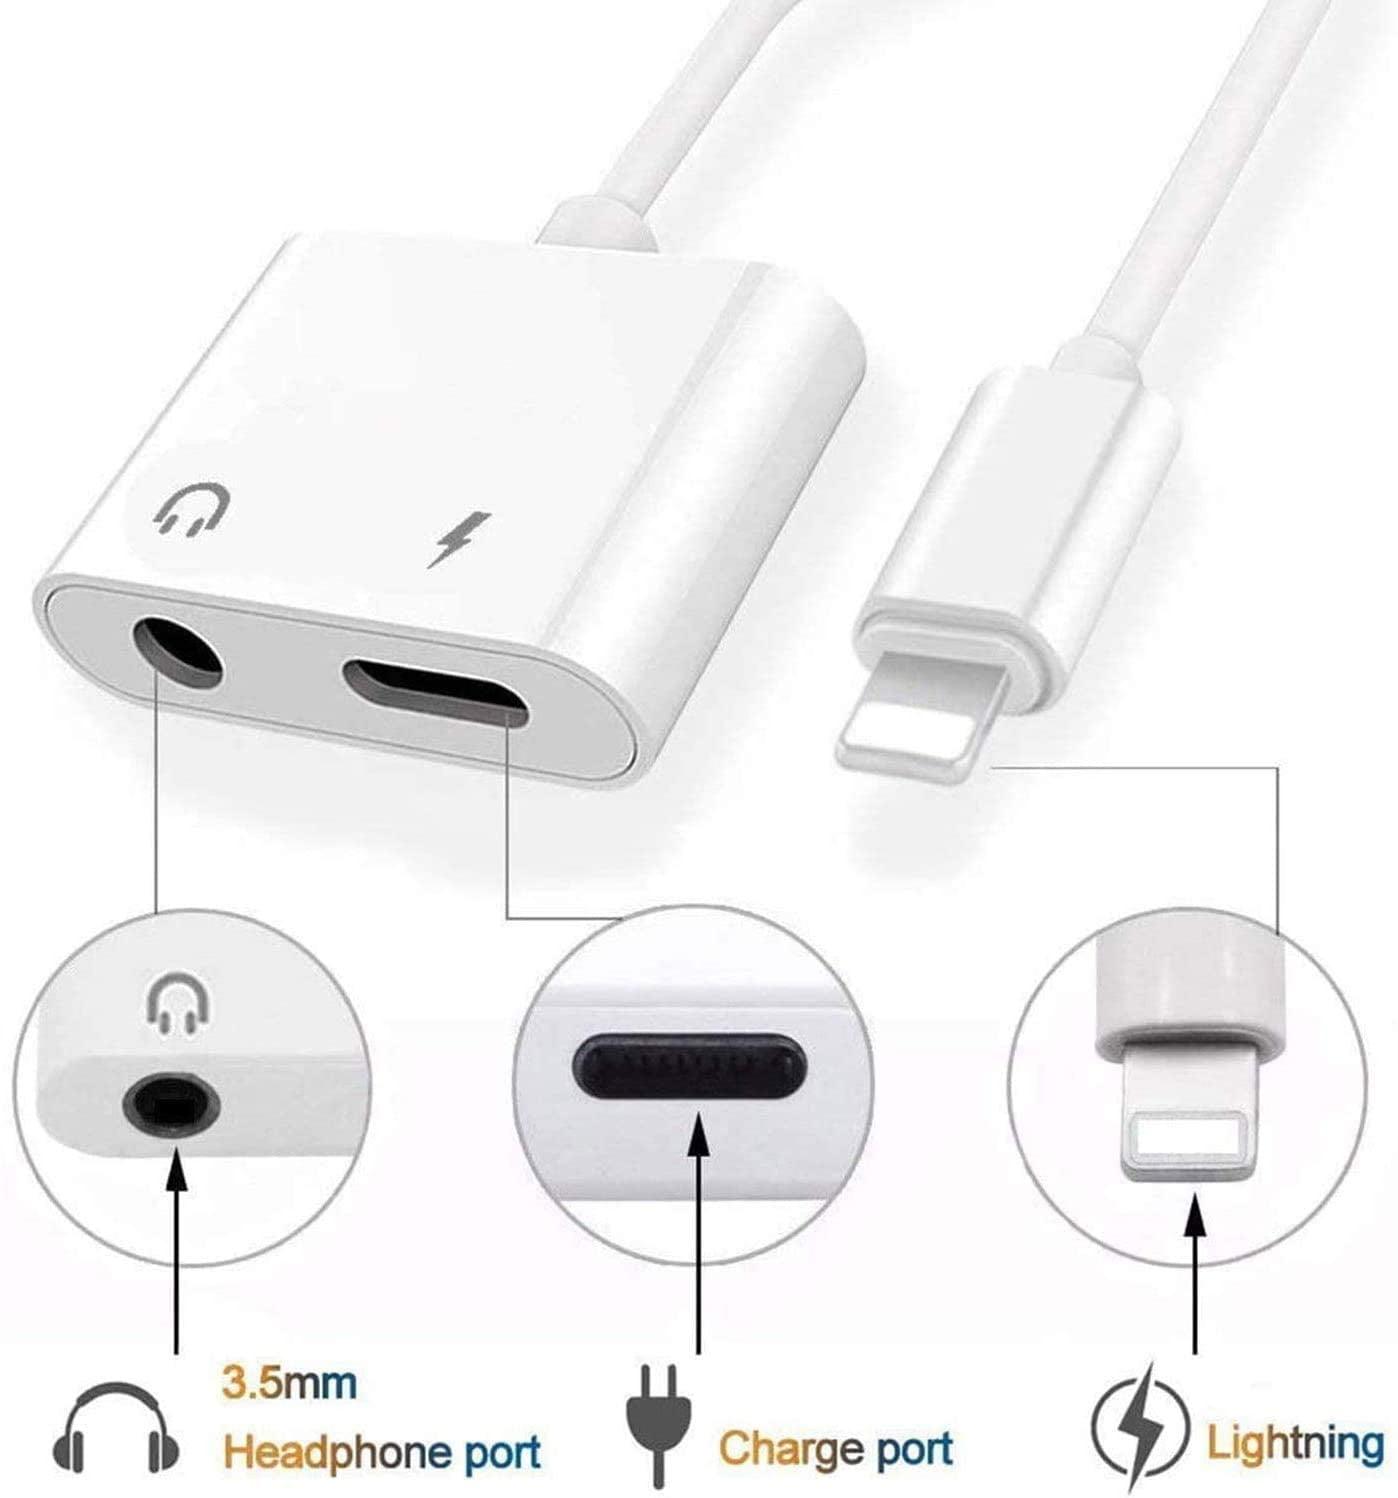 Apple now sells an iPhone dongle with a headphone jack and